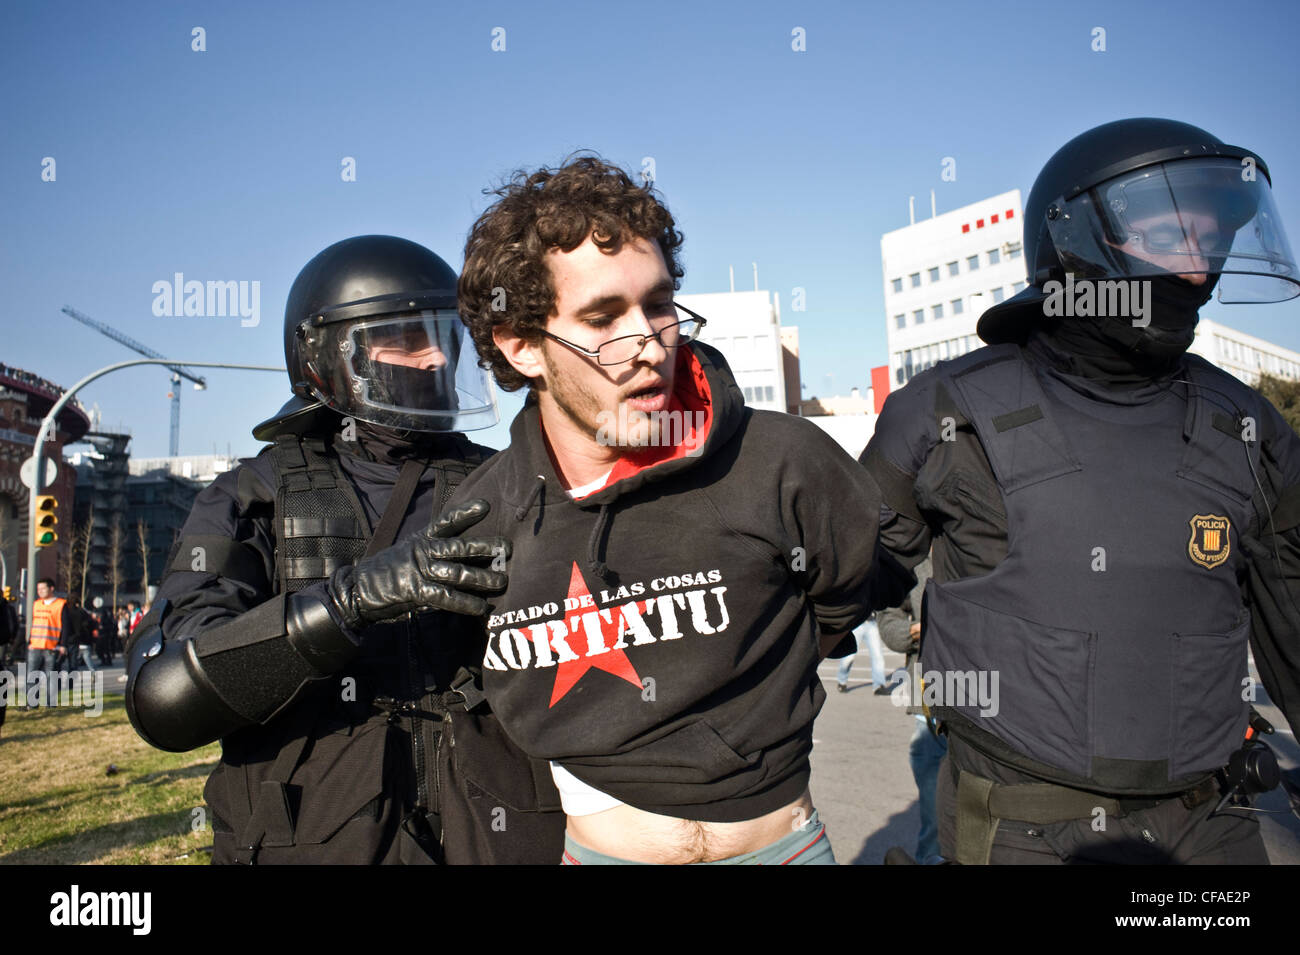 Arrest of a demonstrator by riot police during the disturbances produced in the vicinity of Mobile World Congress in Barcelona. Stock Photo